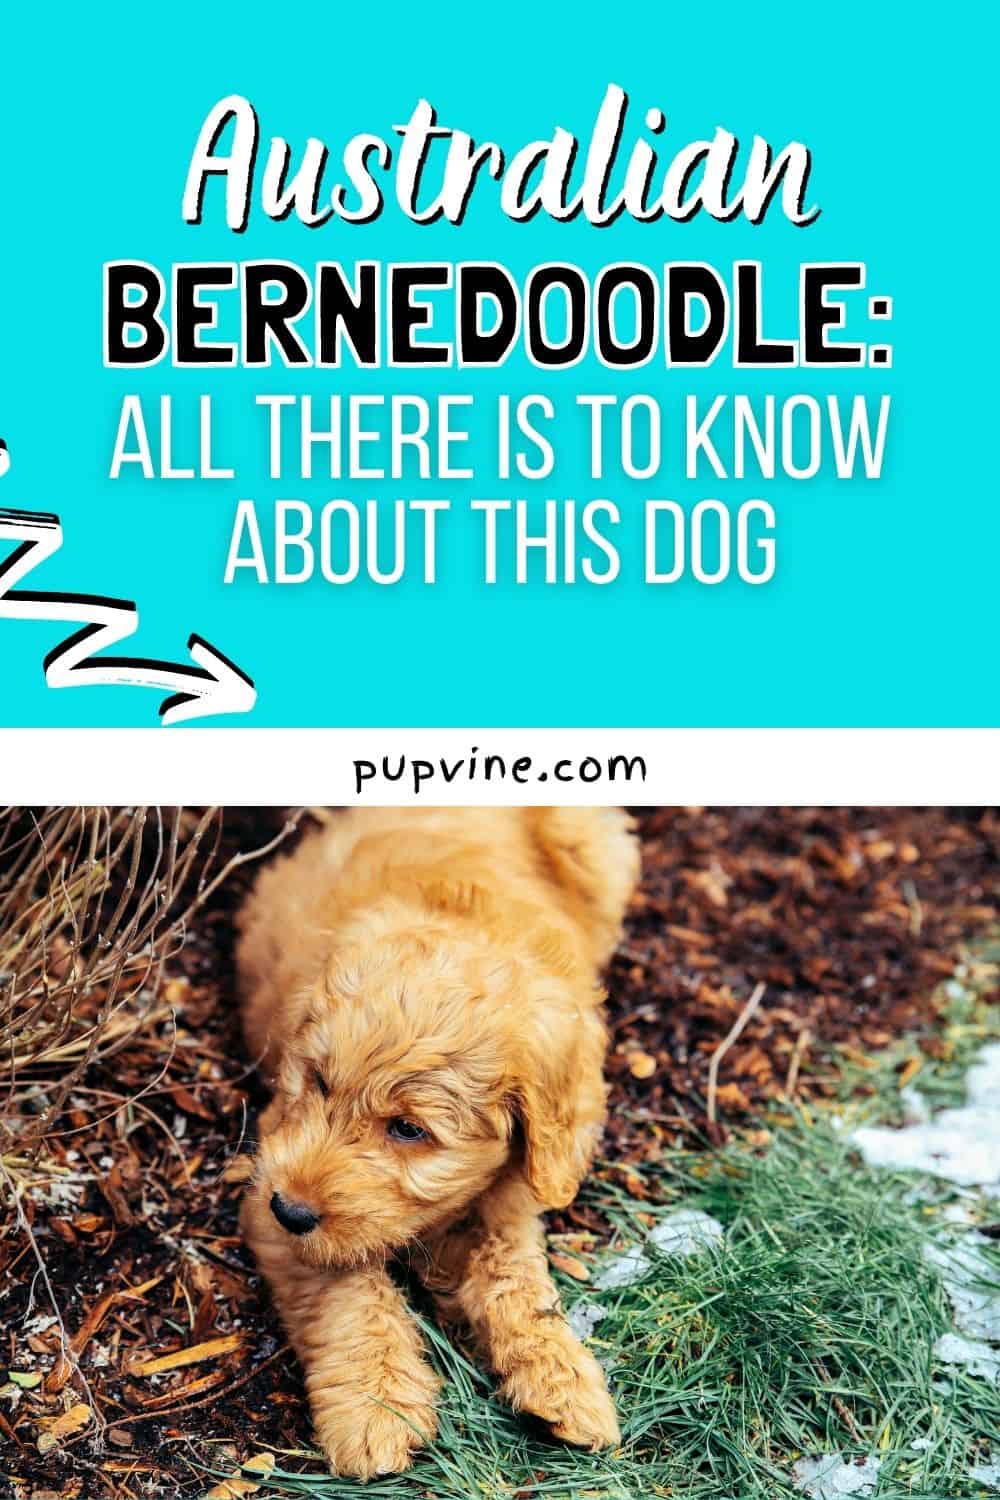 Australian Bernedoodle: All There Is To Know About This Dog